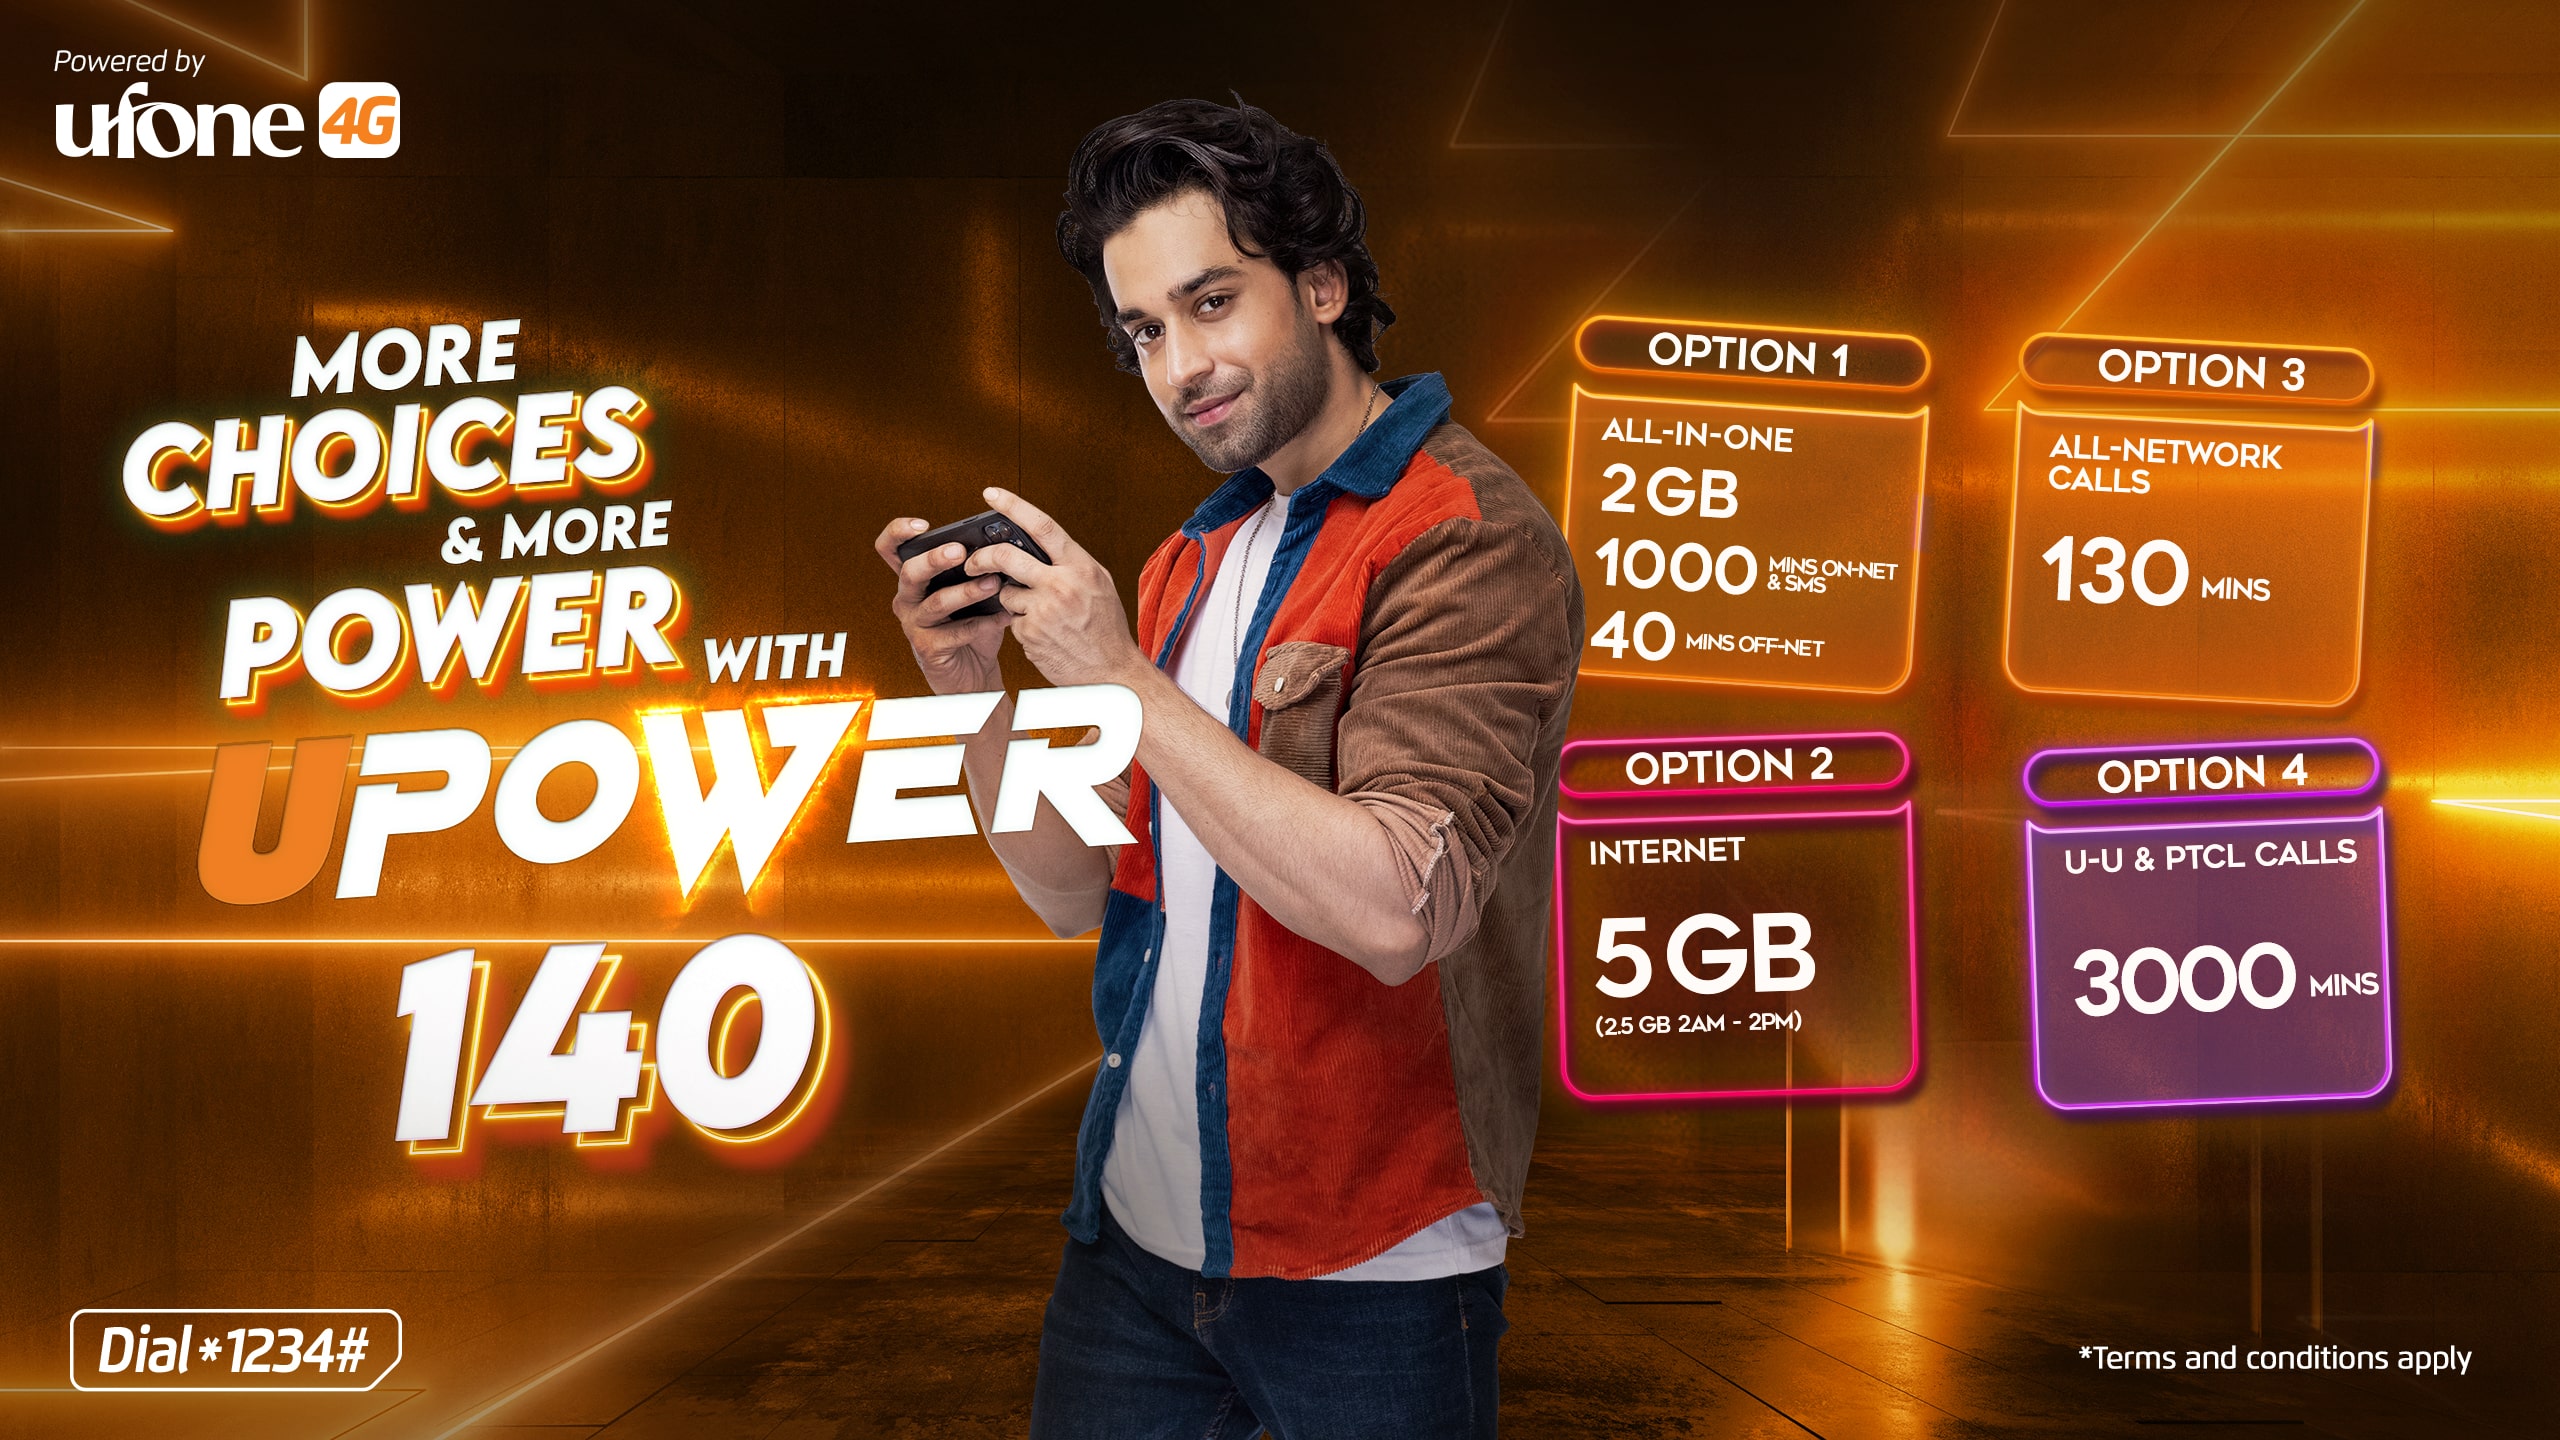 Ufone 4G expands its bundle portfolio by launching 'UPower 140' - Ufone 4G